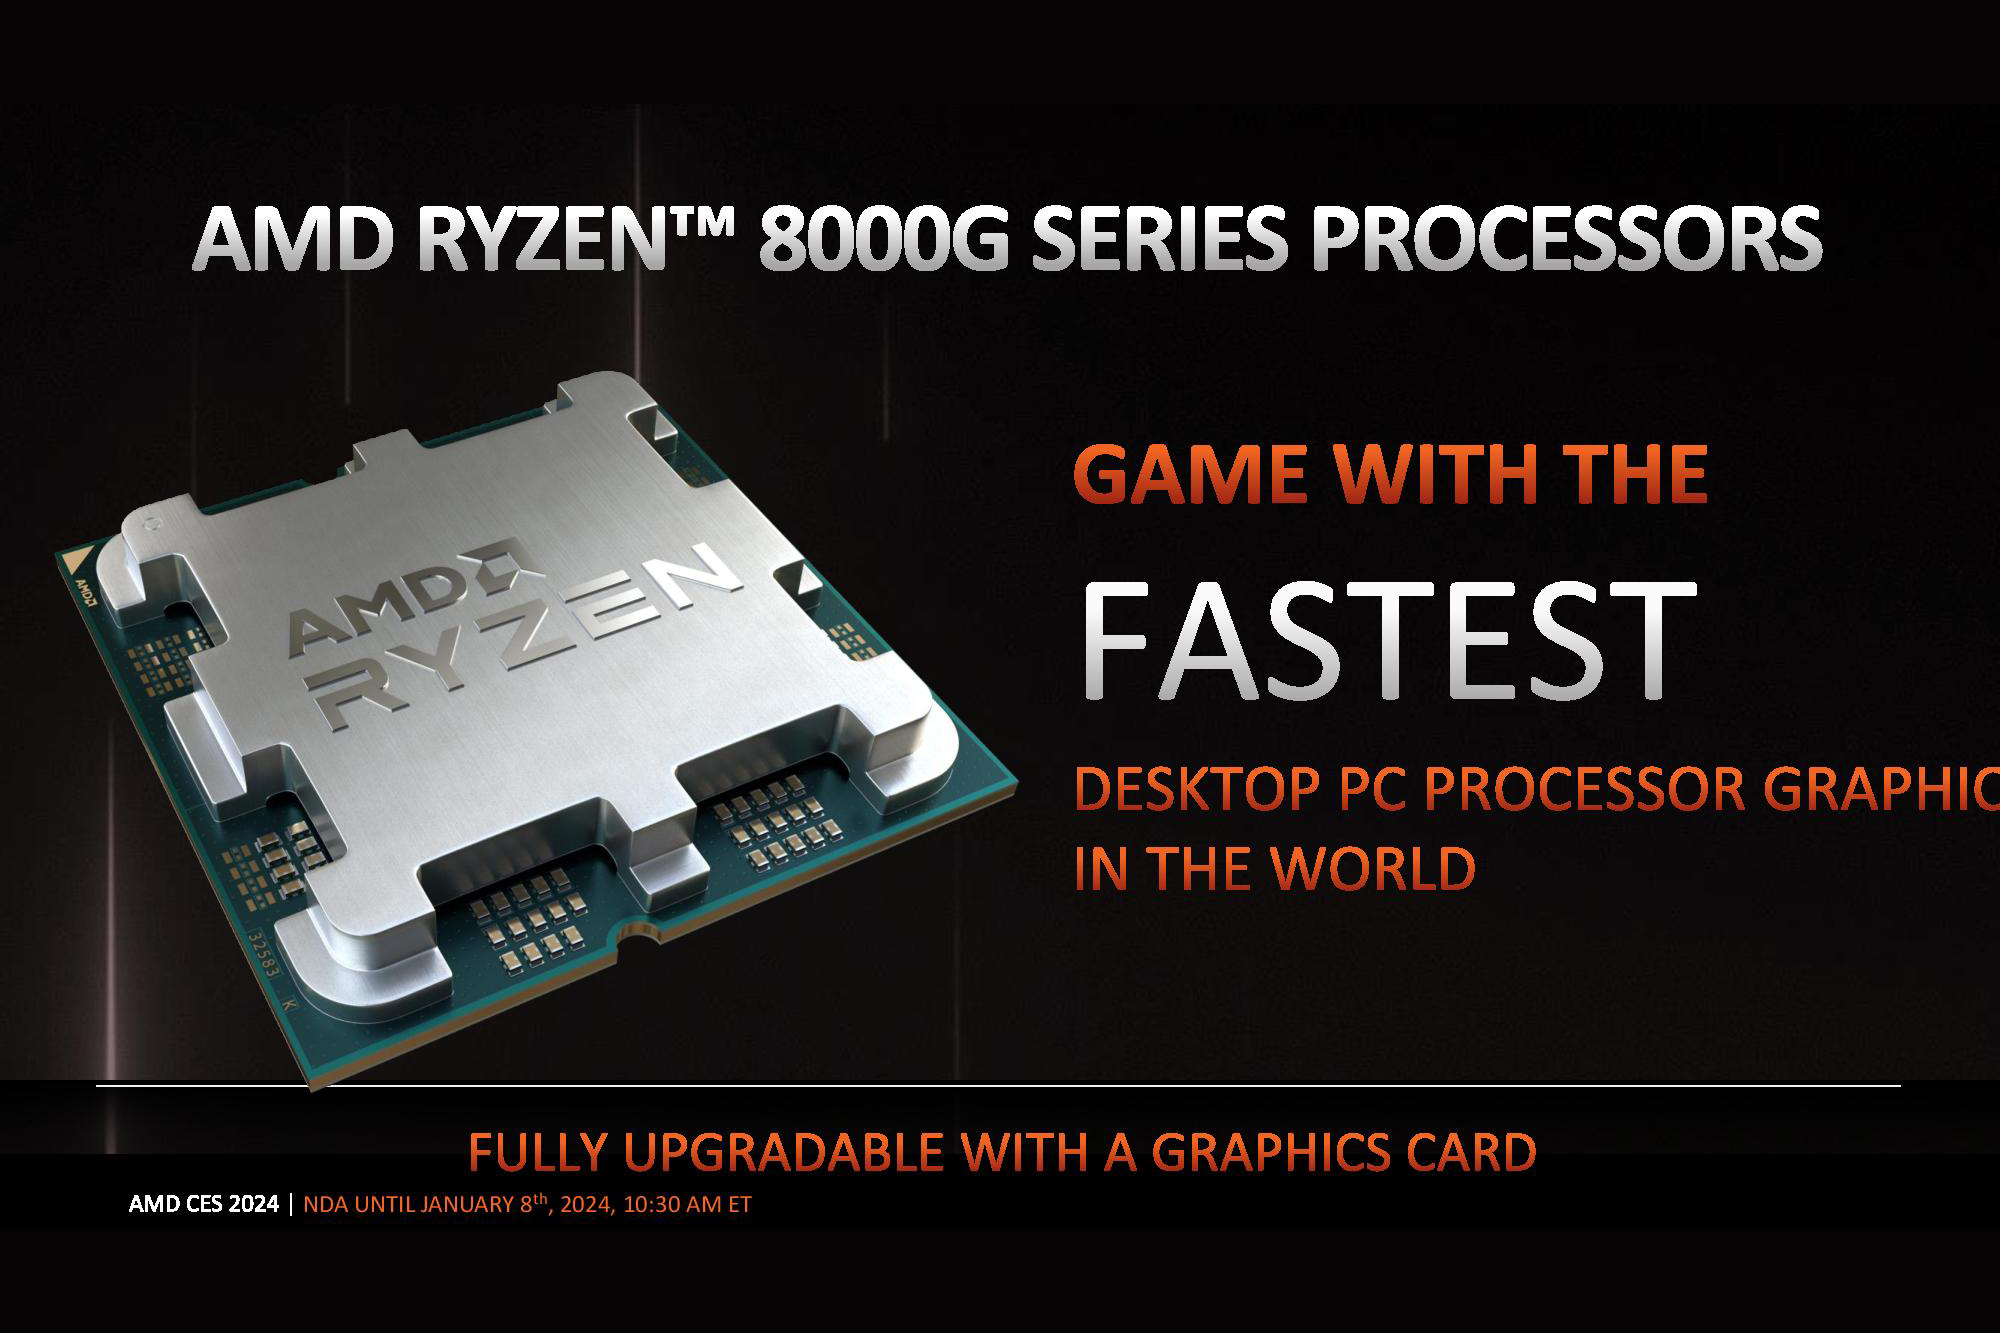 AMD introduced the Ryzen 7 8700G chip with Radeon 780M RDNA 3 graphics - a competitor to NVIDIA GTX 1650